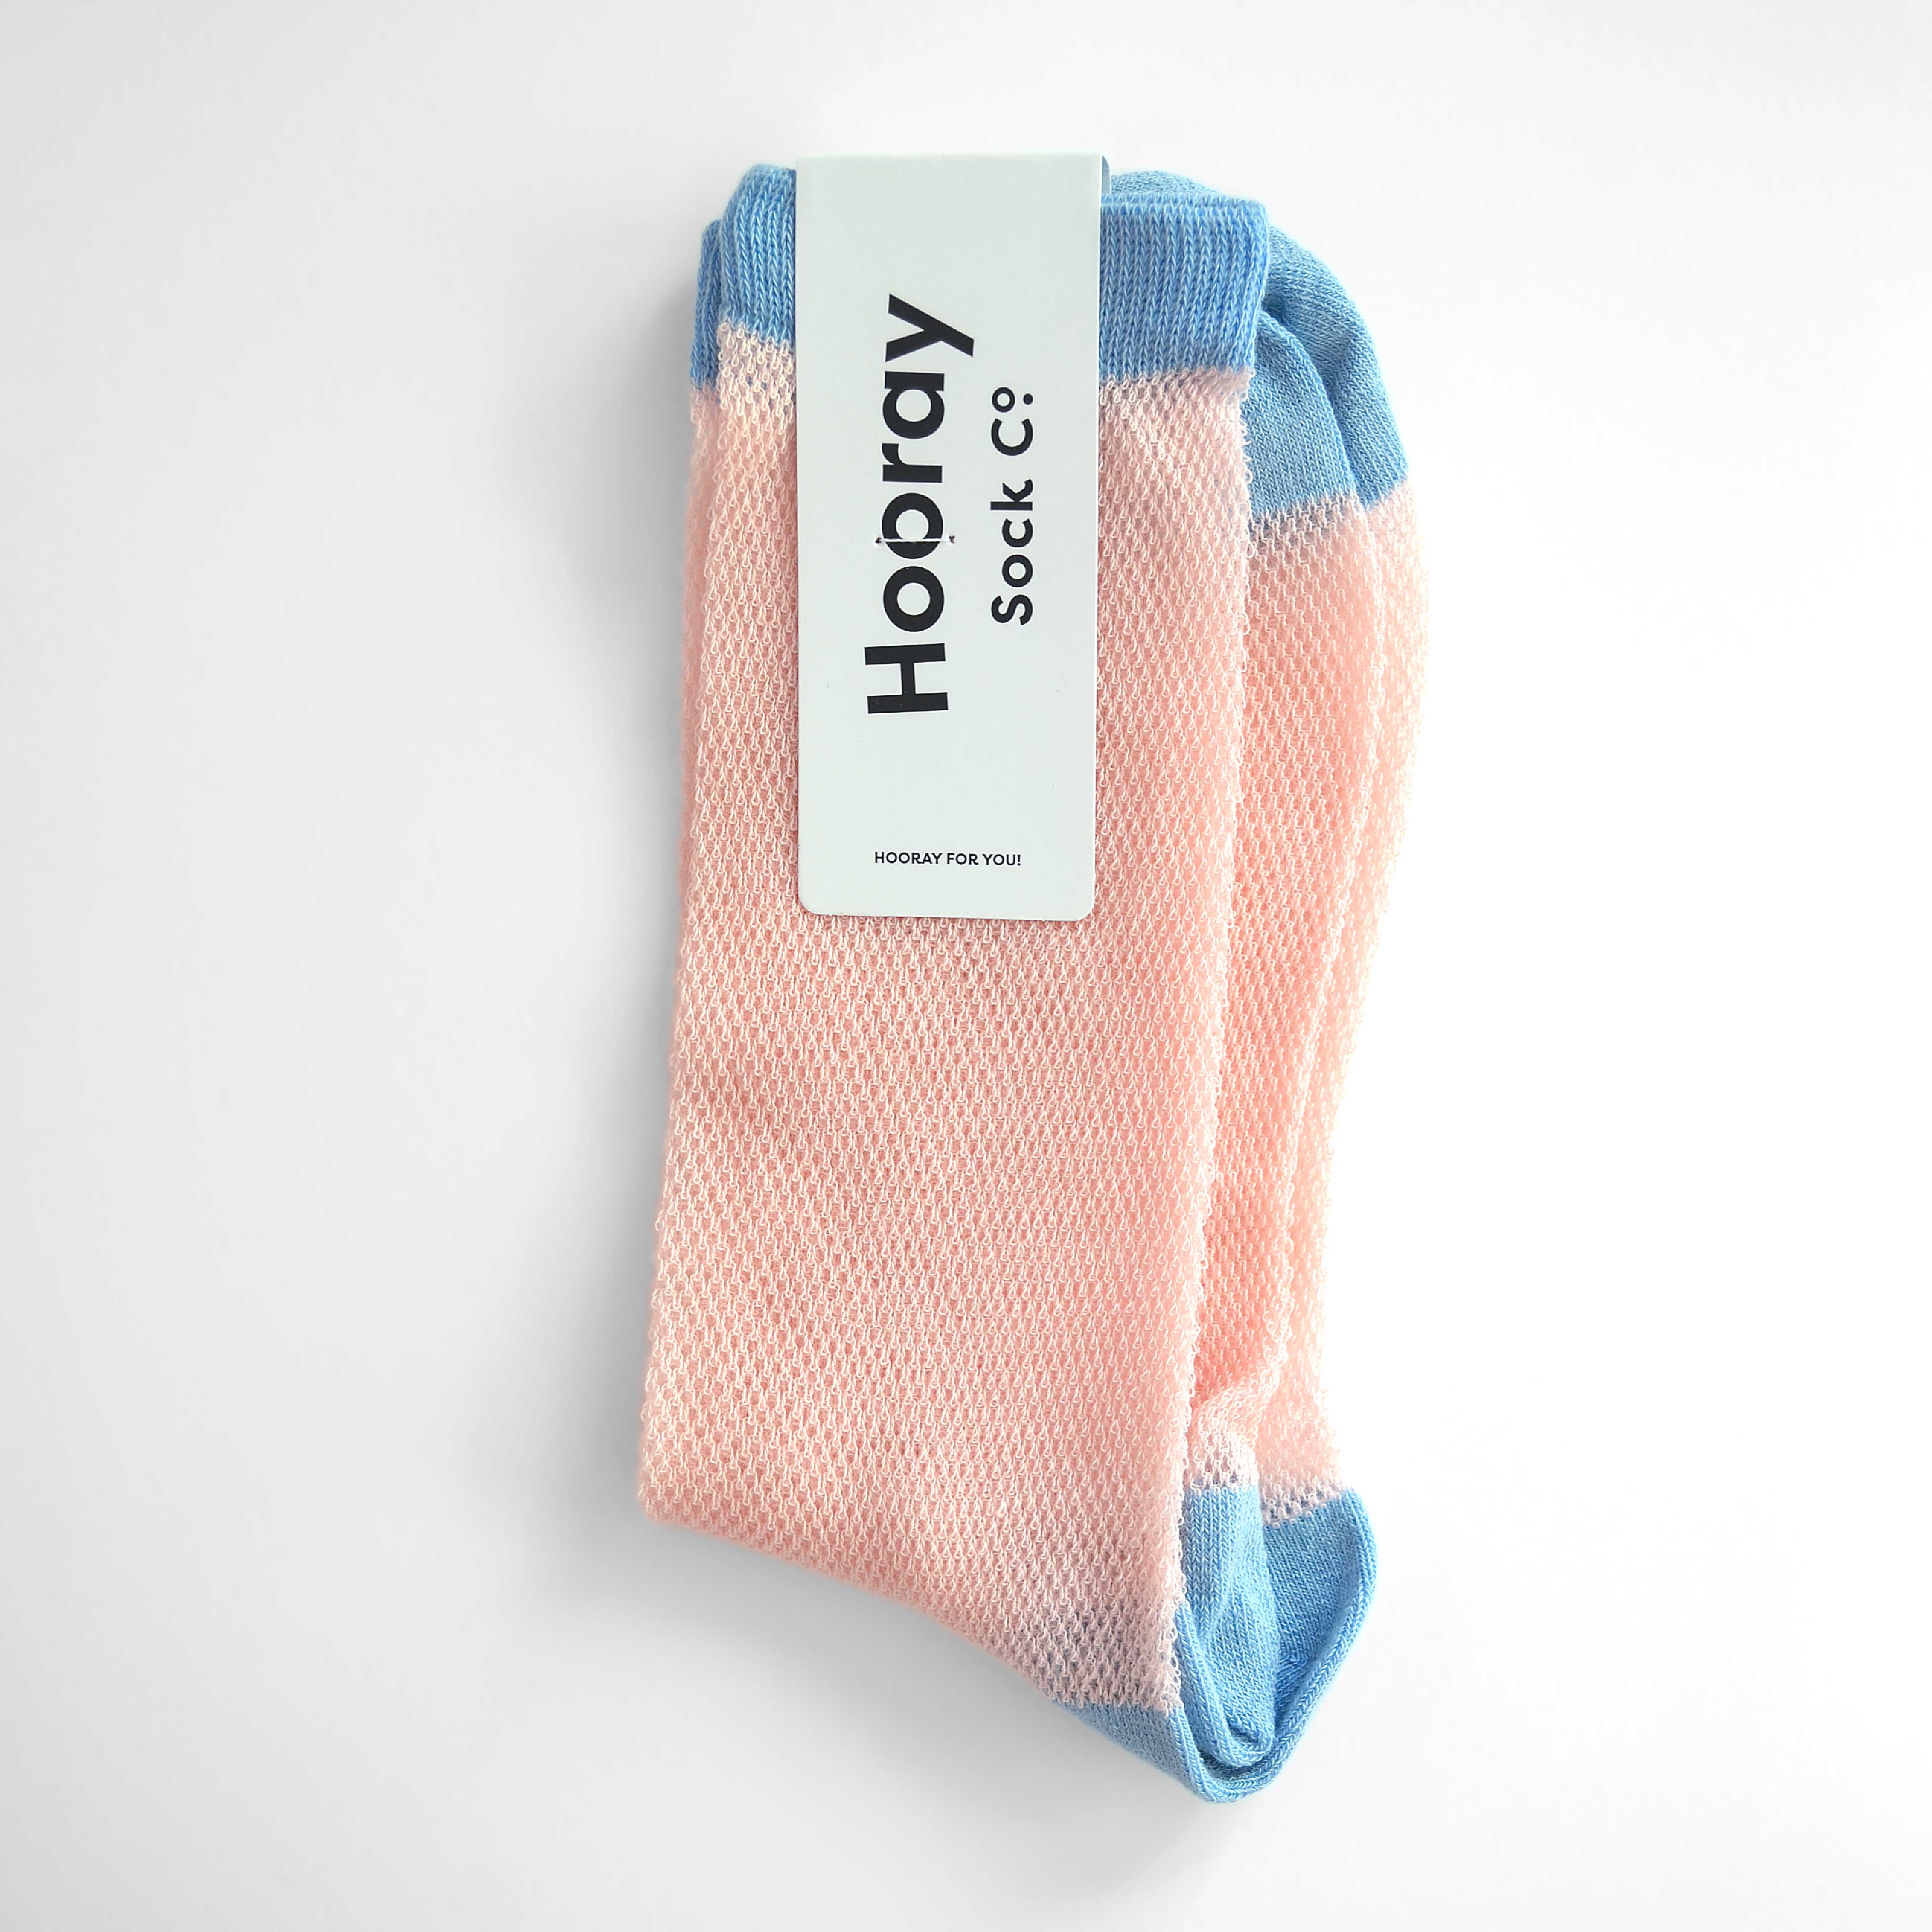 'Valencia' mid-crew socks, showcasing an open mesh sheer design in Cantaloupe, Pink, and Purple, effortlessly blending breathability and chic style. Size: Small (US women’s shoe size: 4-8).